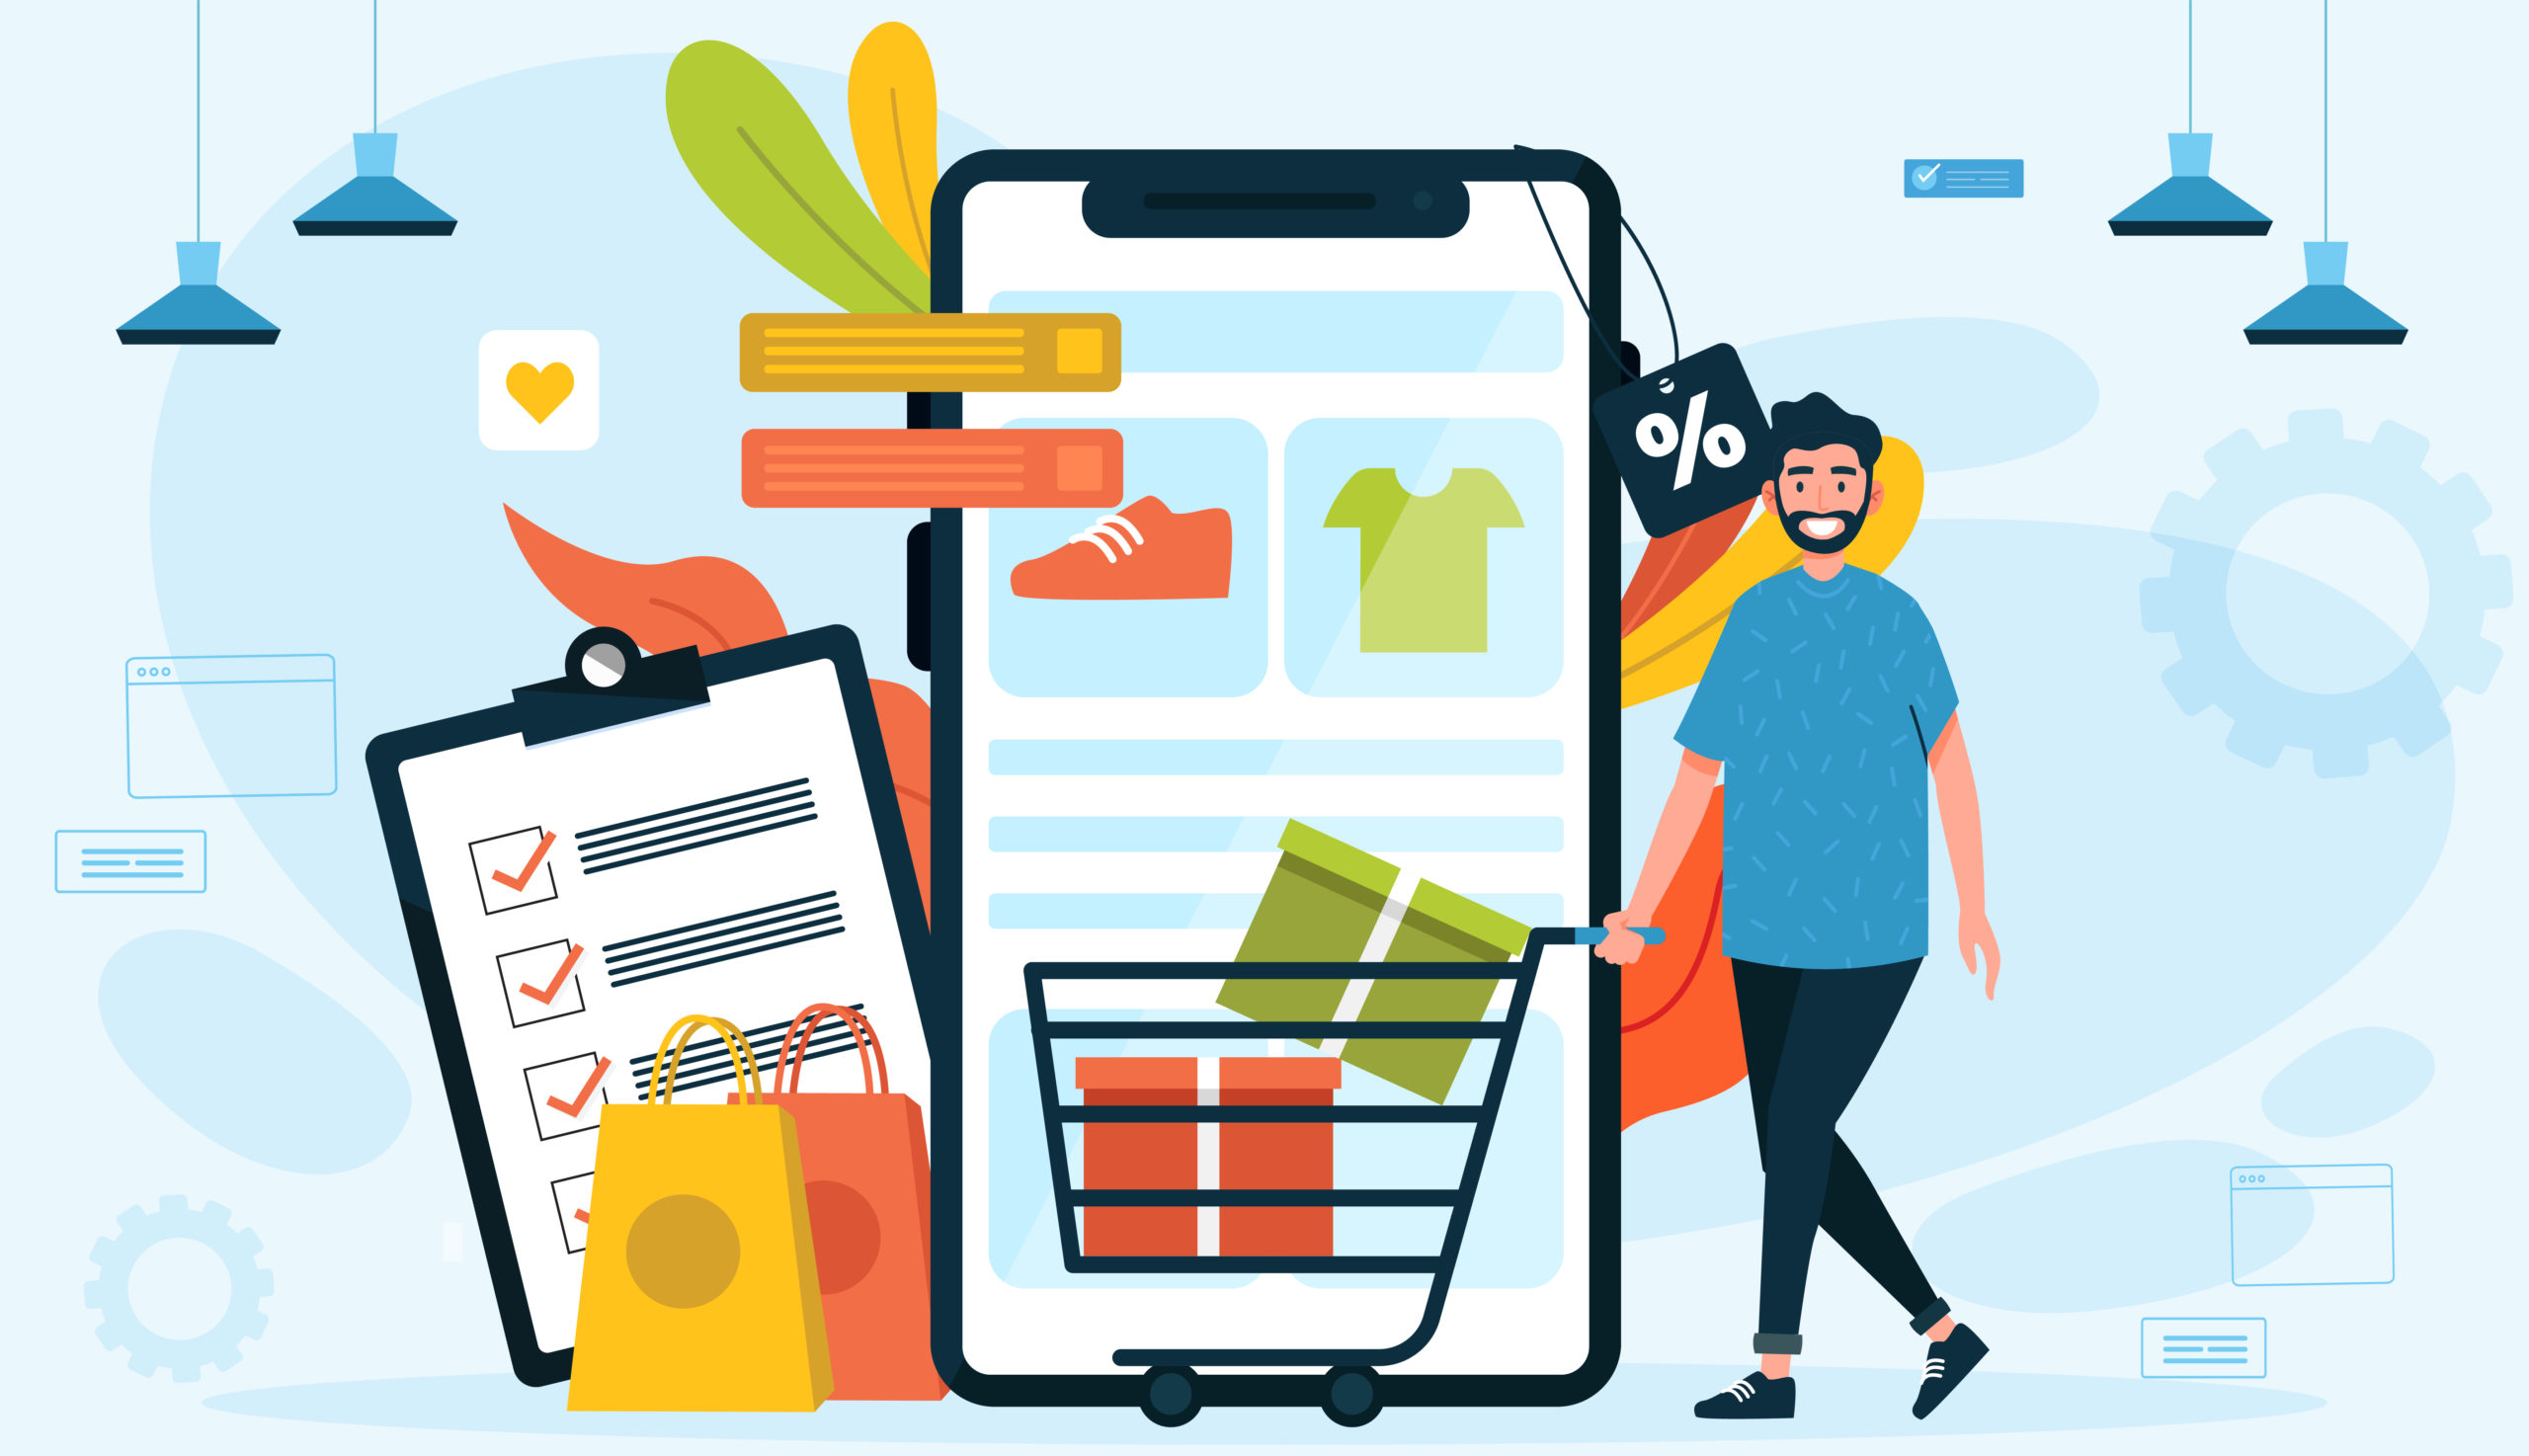 ow to Get Consumers to Notice Your Retail App